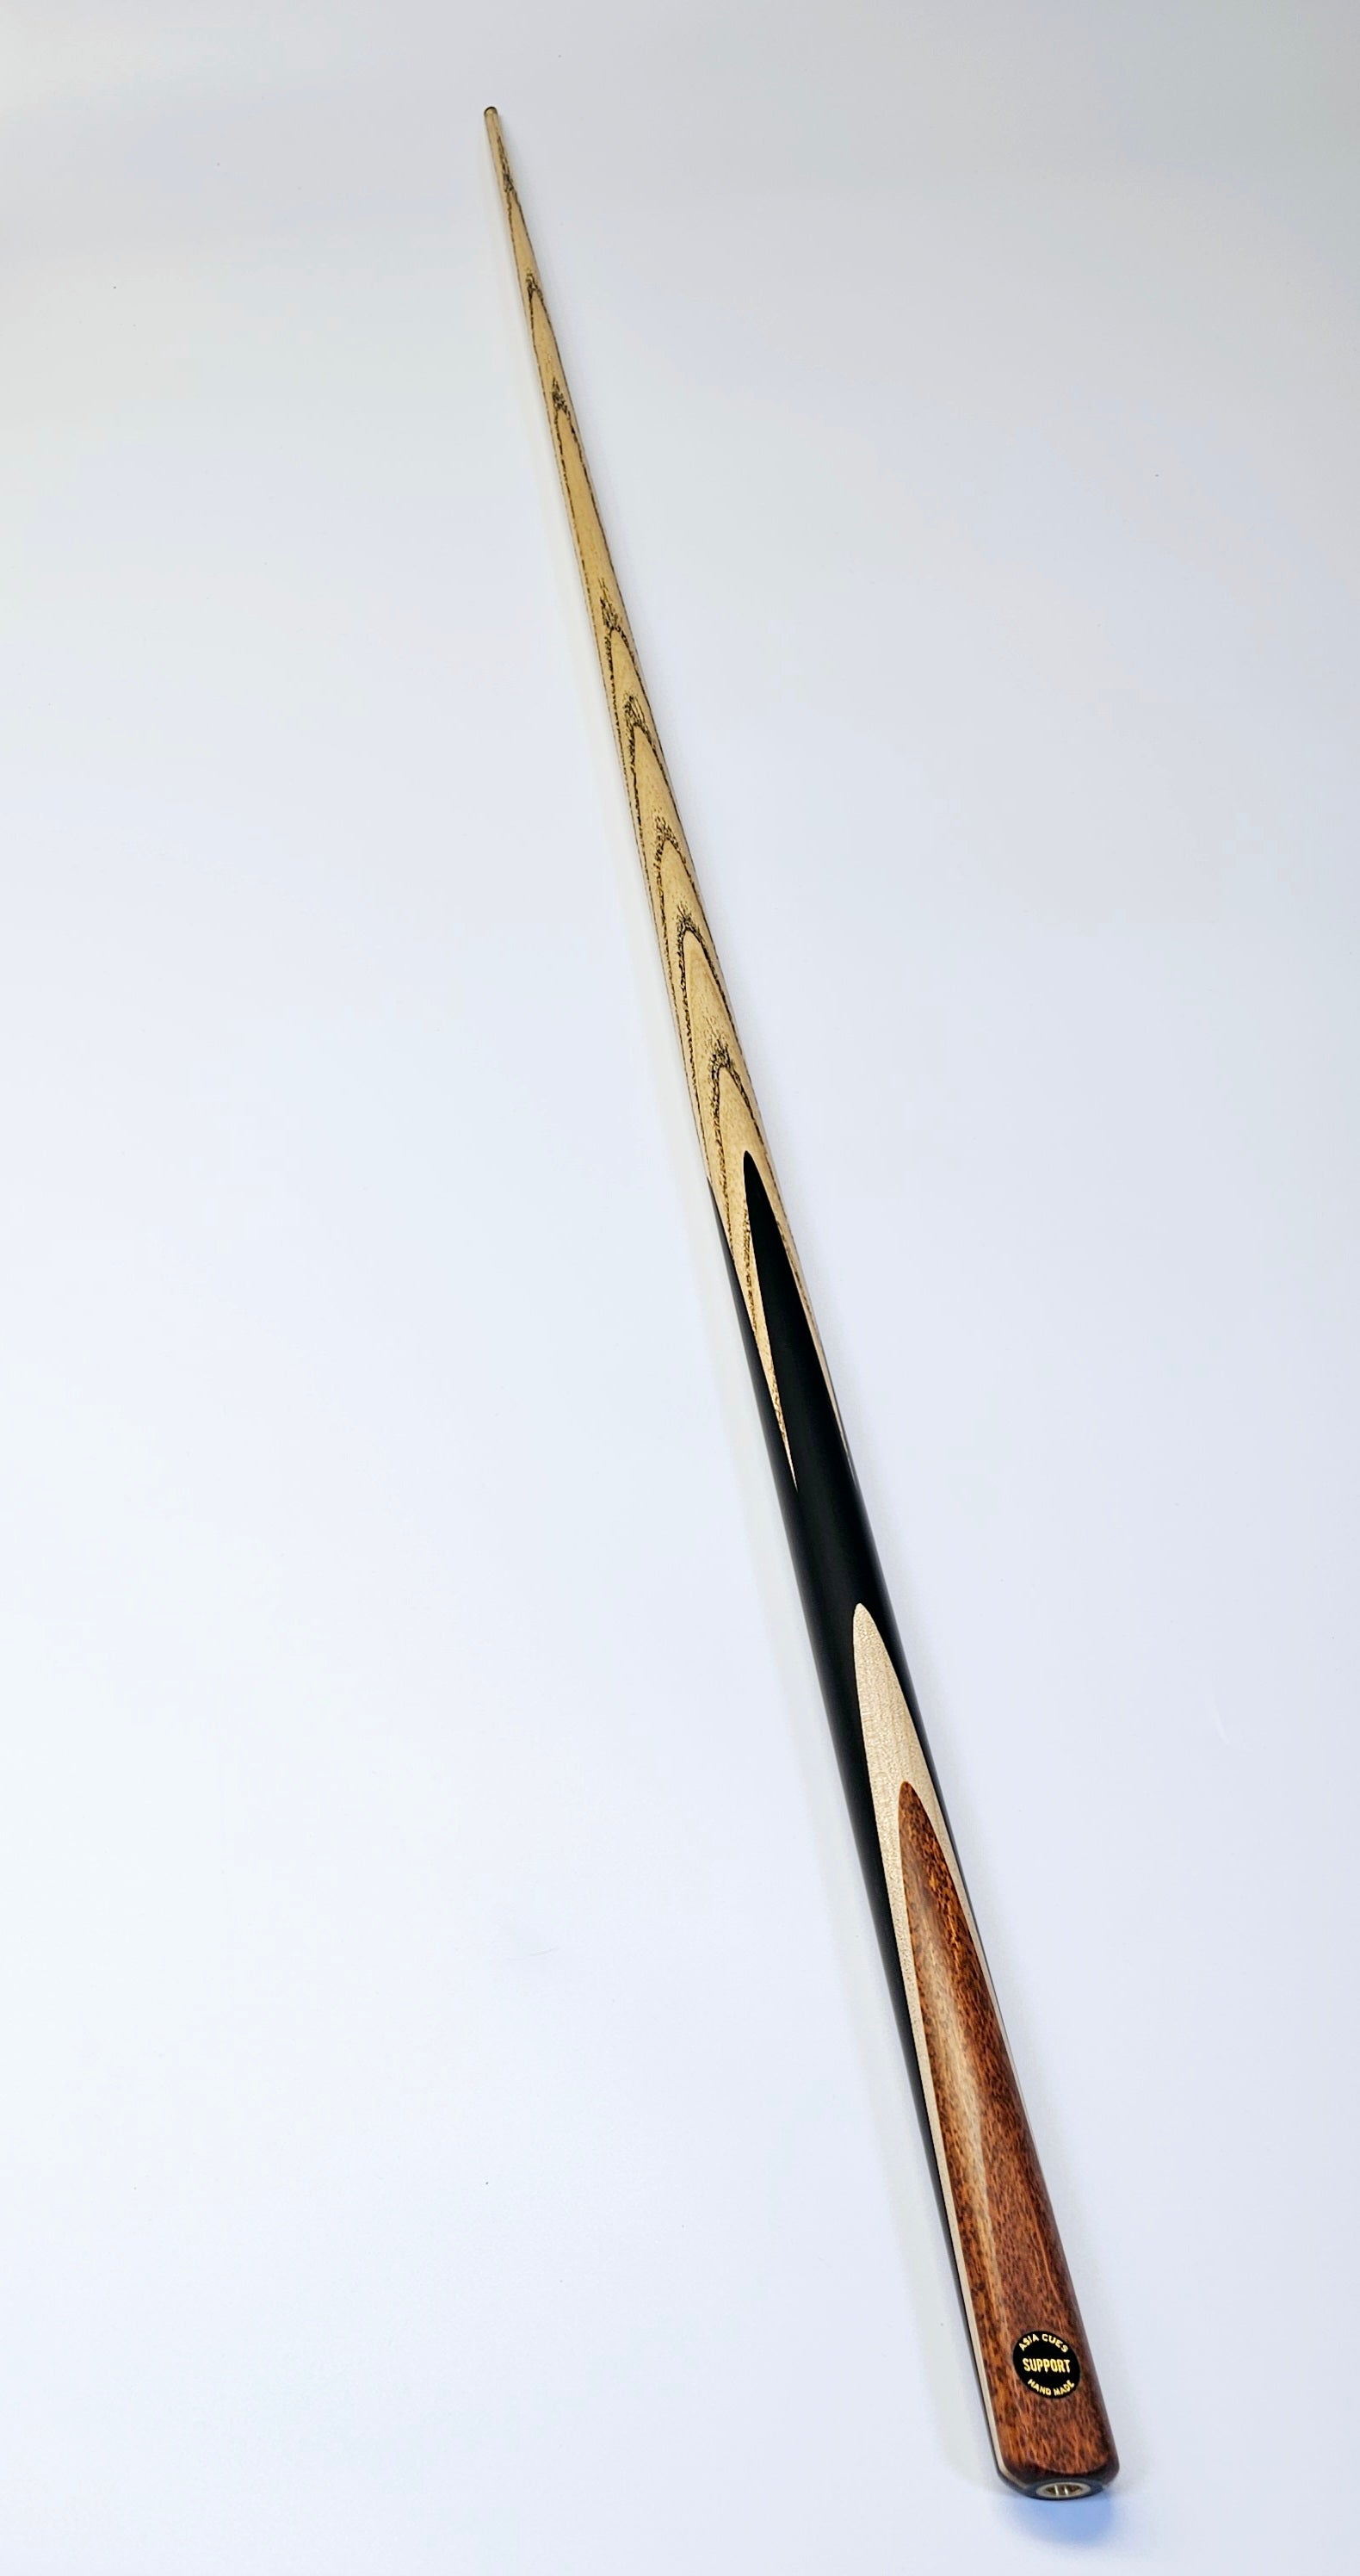 Asia Cues Support - One Piece Snooker Cue 9.5mm Tip, 17.9oz, 57"